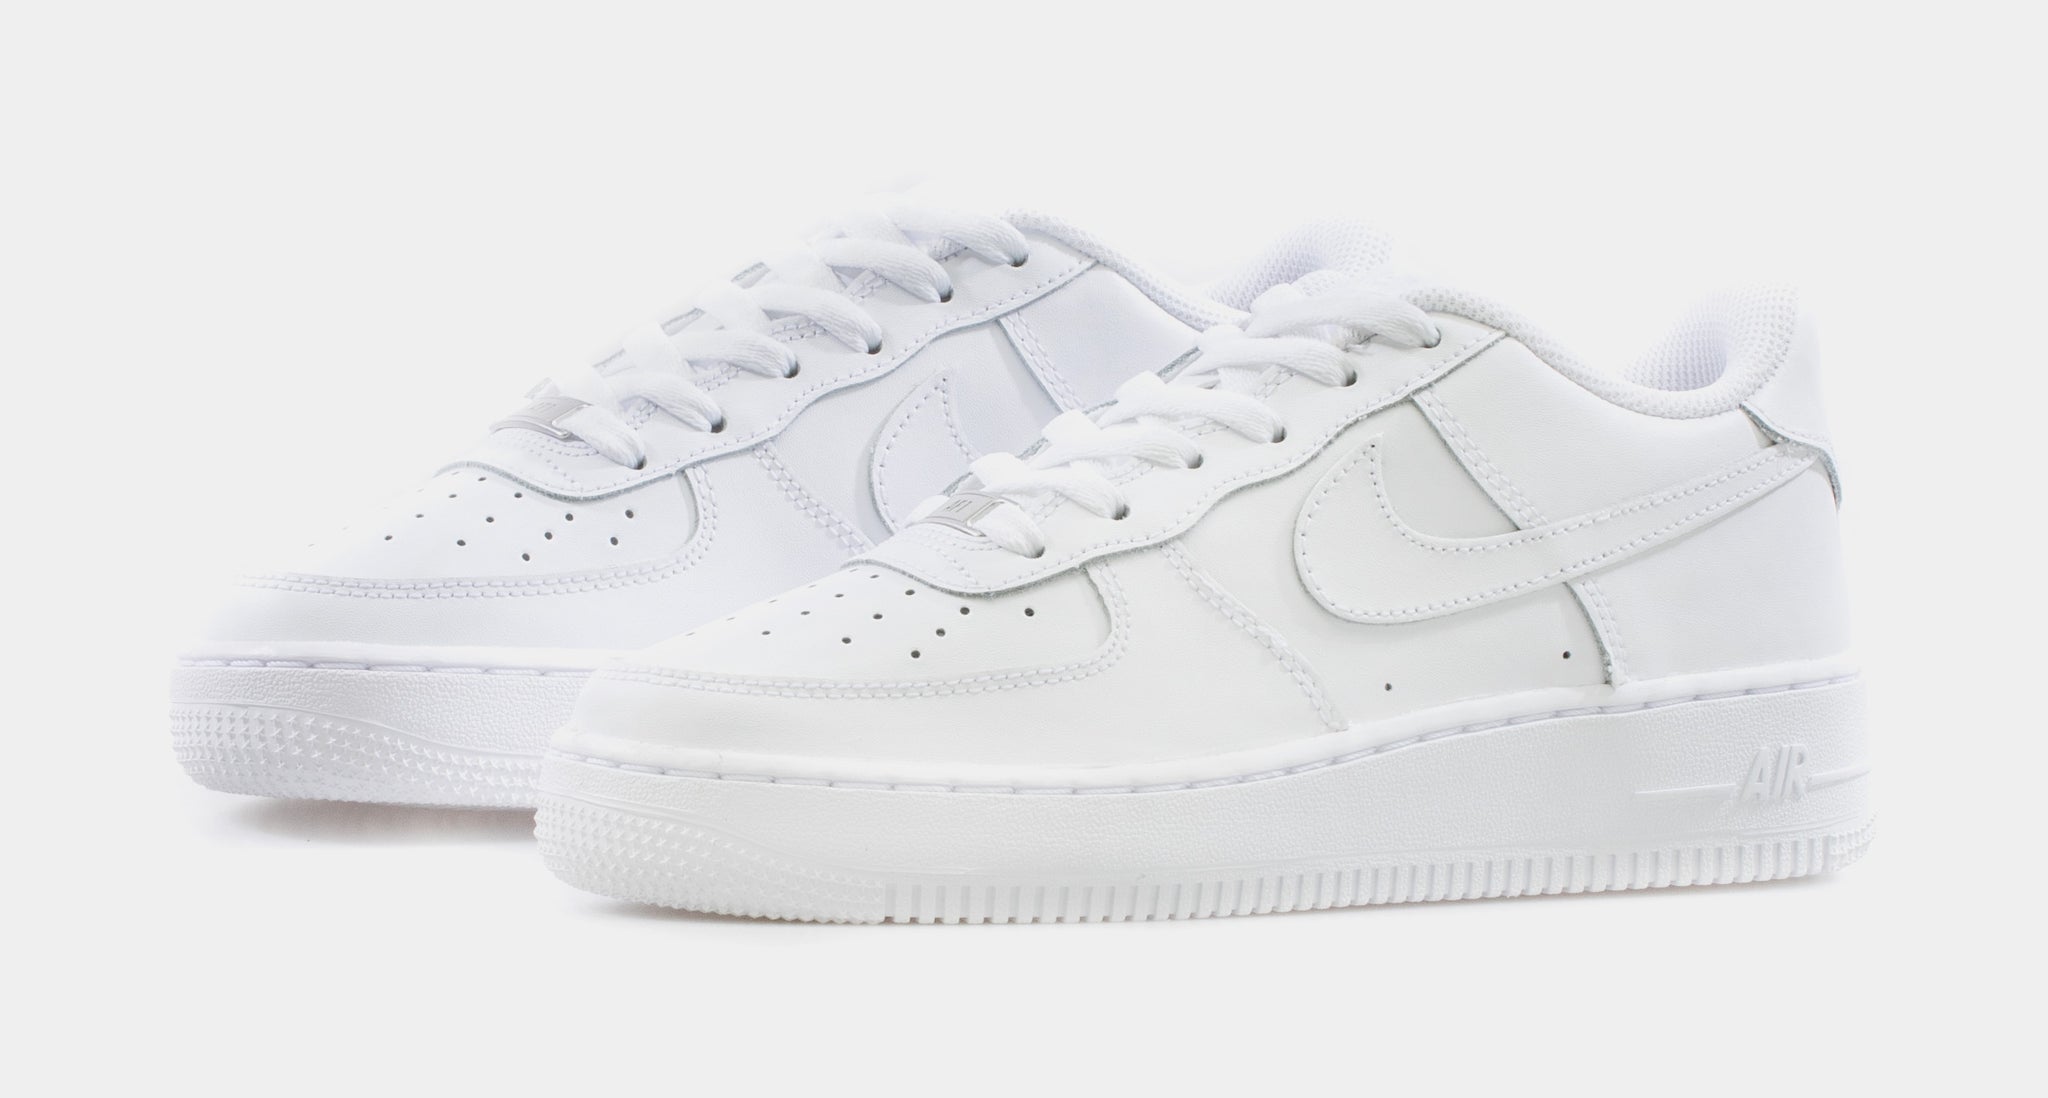 Where to buy Nike Air Force 1 Low “Light Bone and Sail” shoes